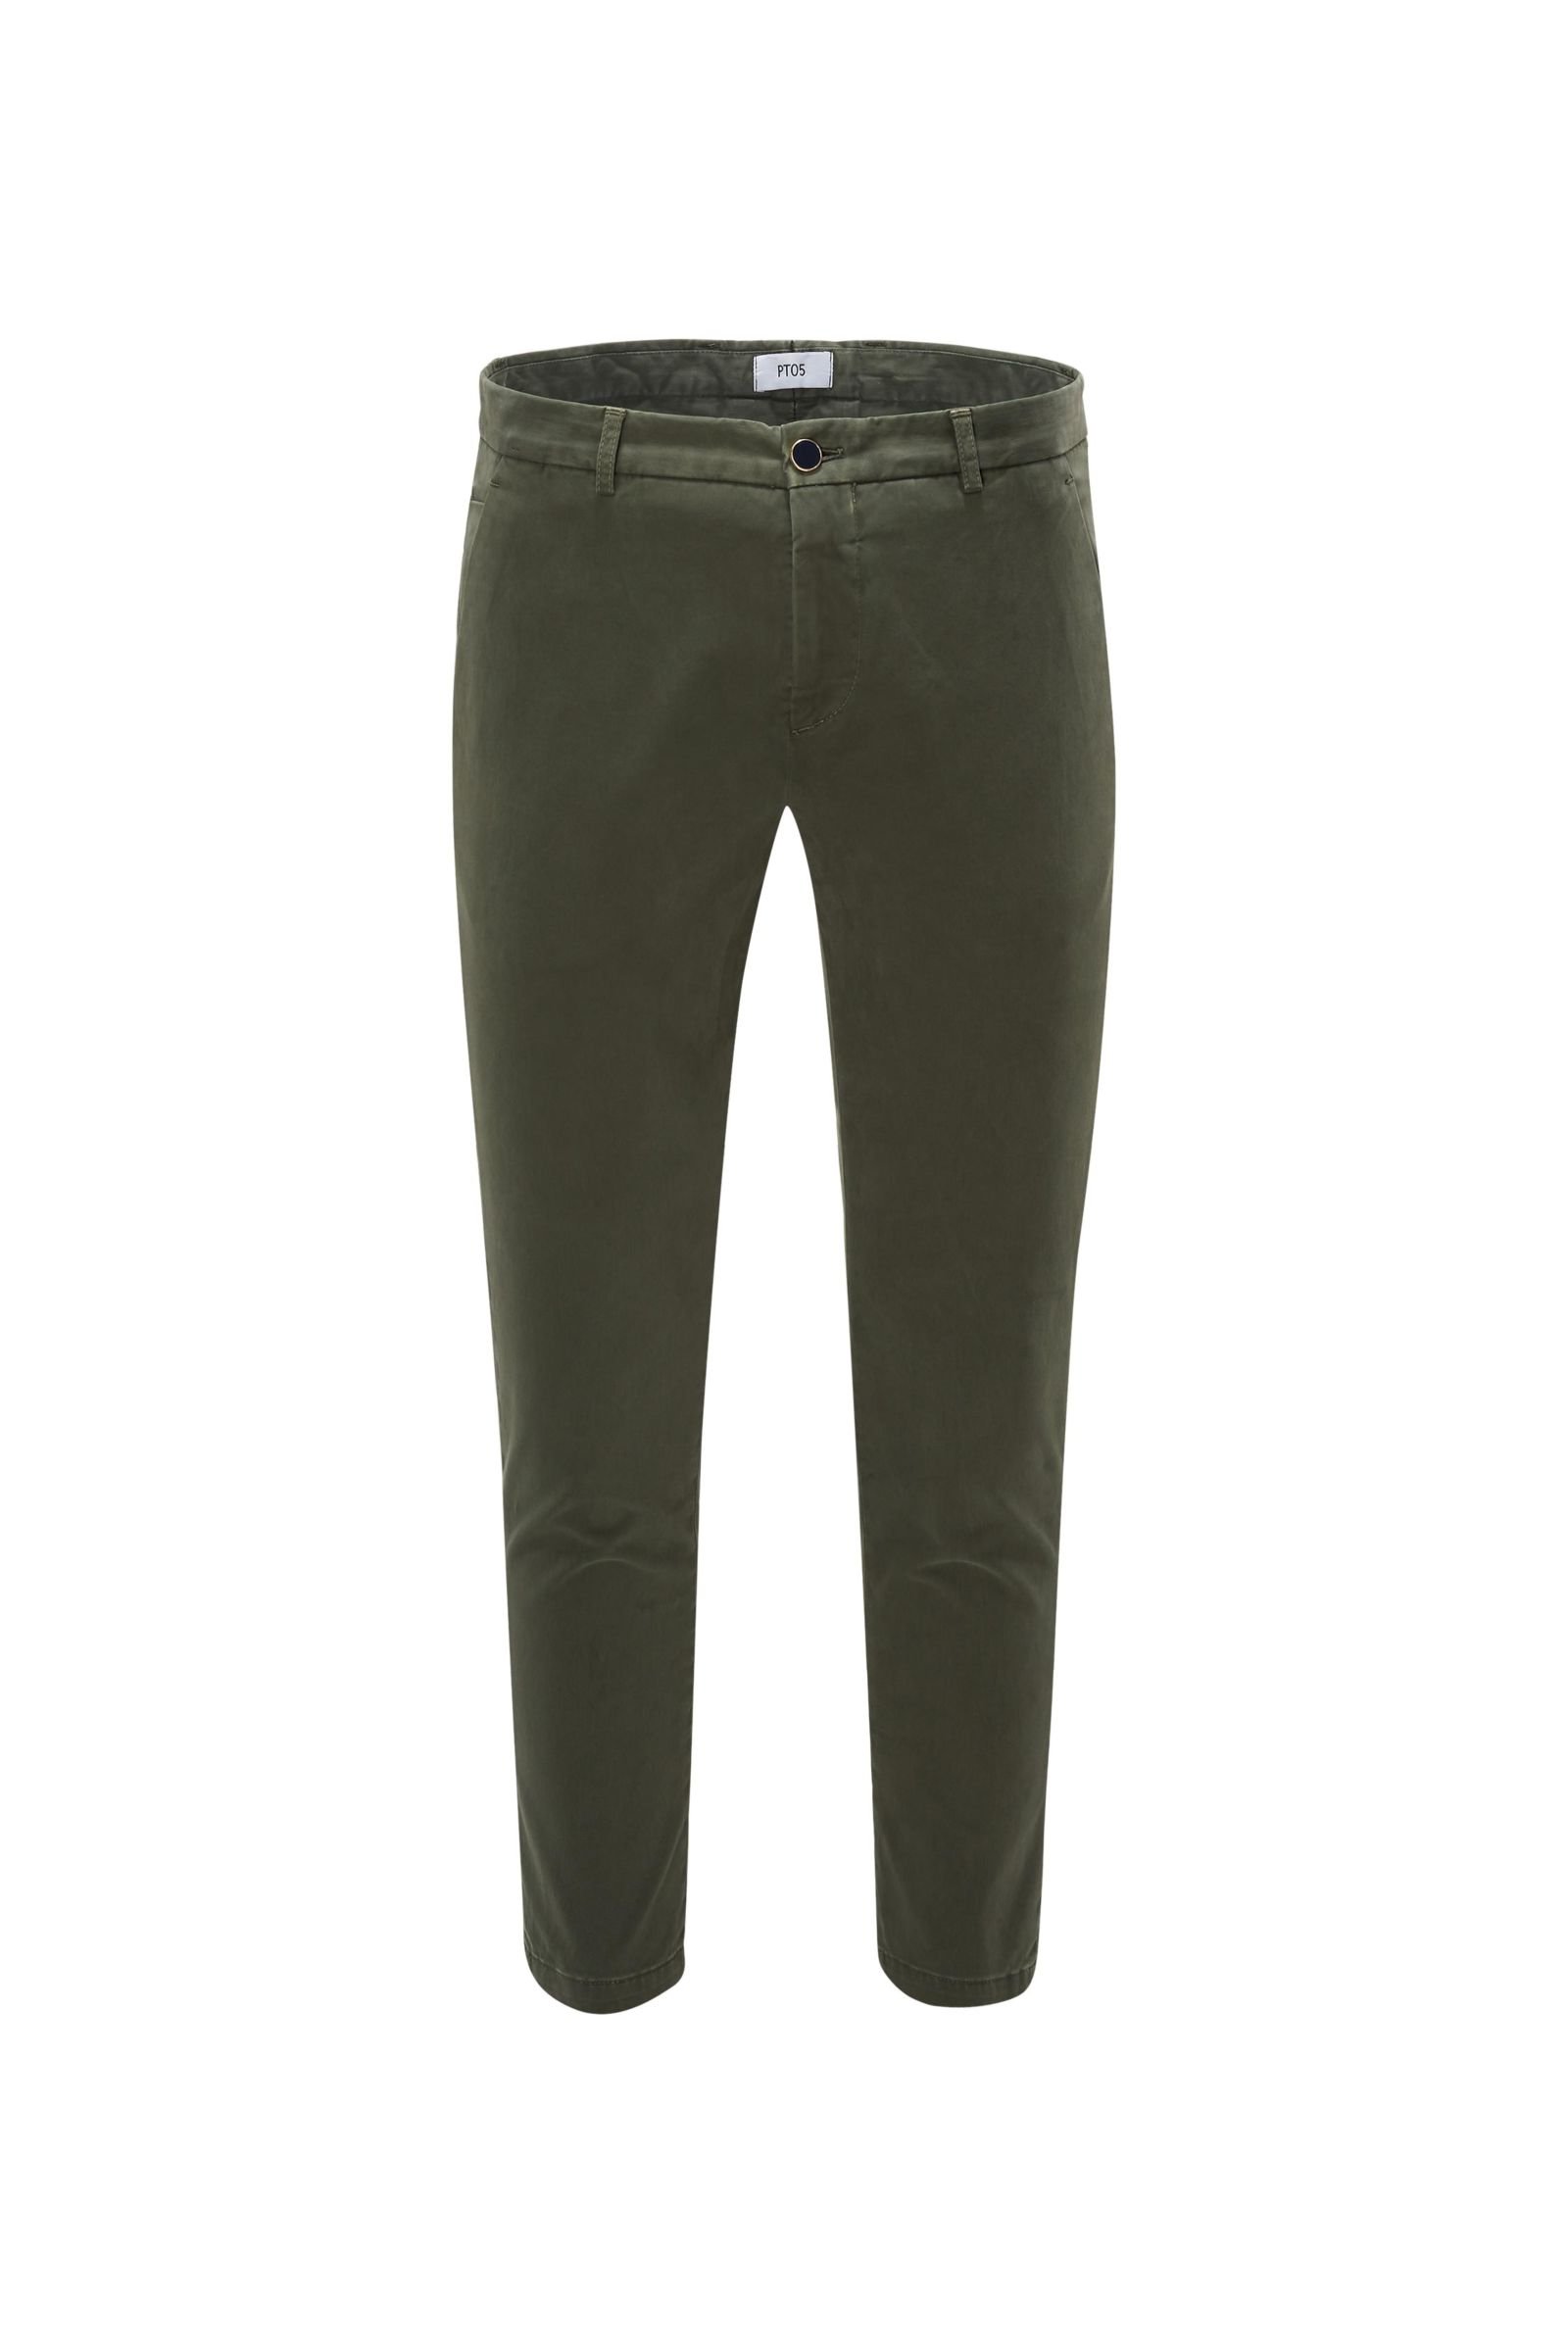 Cotton trousers 'Jungle Shaped Fit' dark green